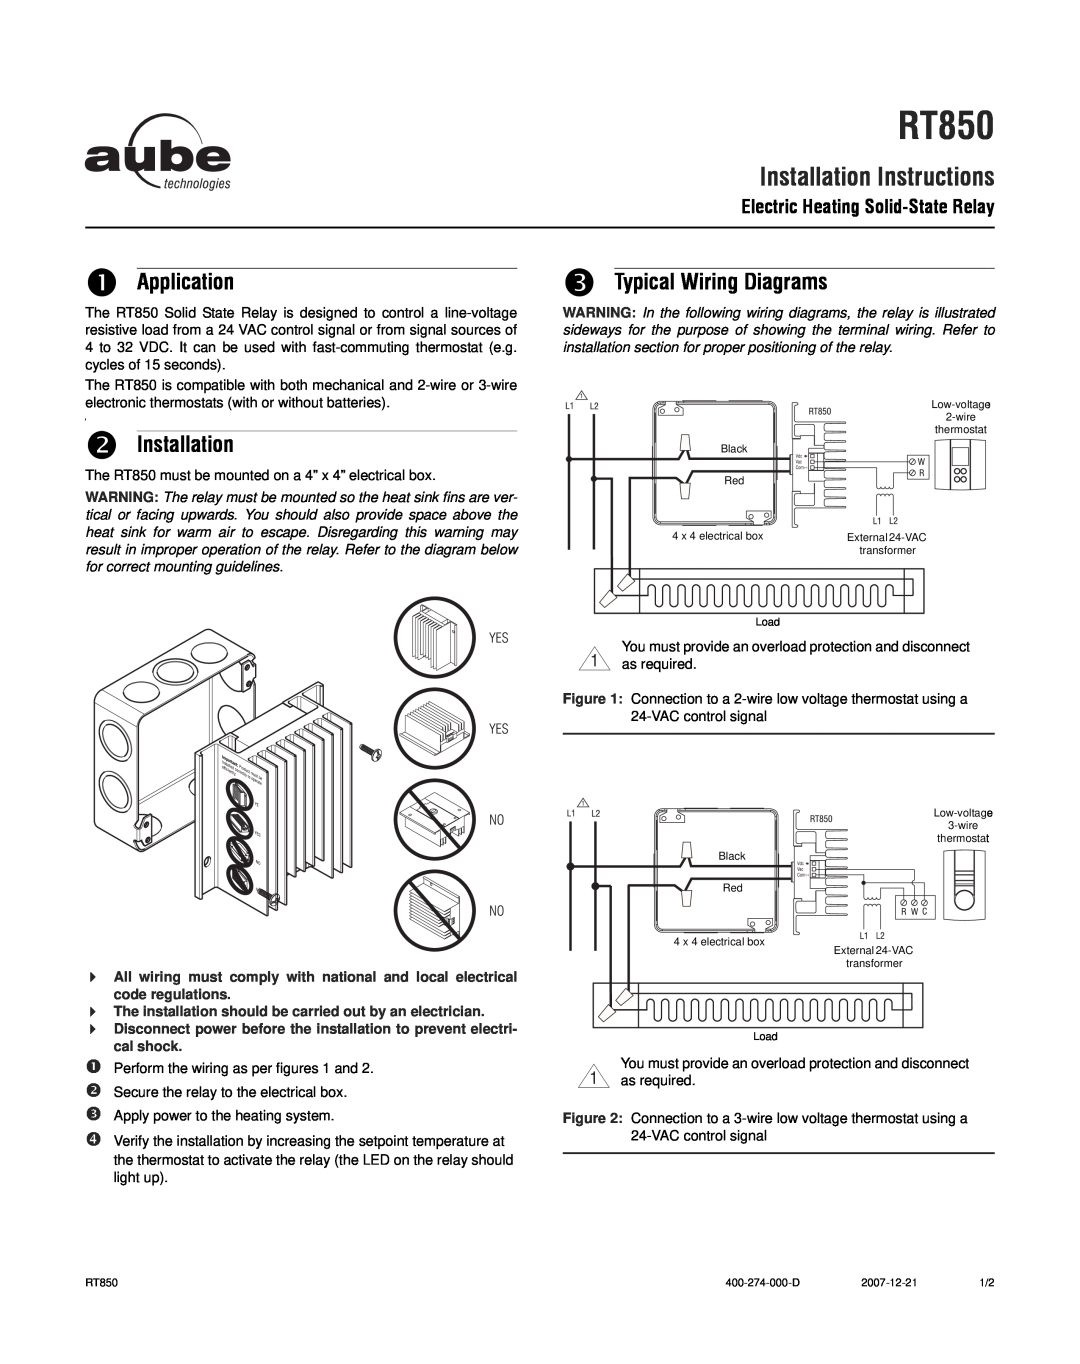 Aube Technologies RT850 installation instructions Application, Typical Wiring Diagrams, o Installation 